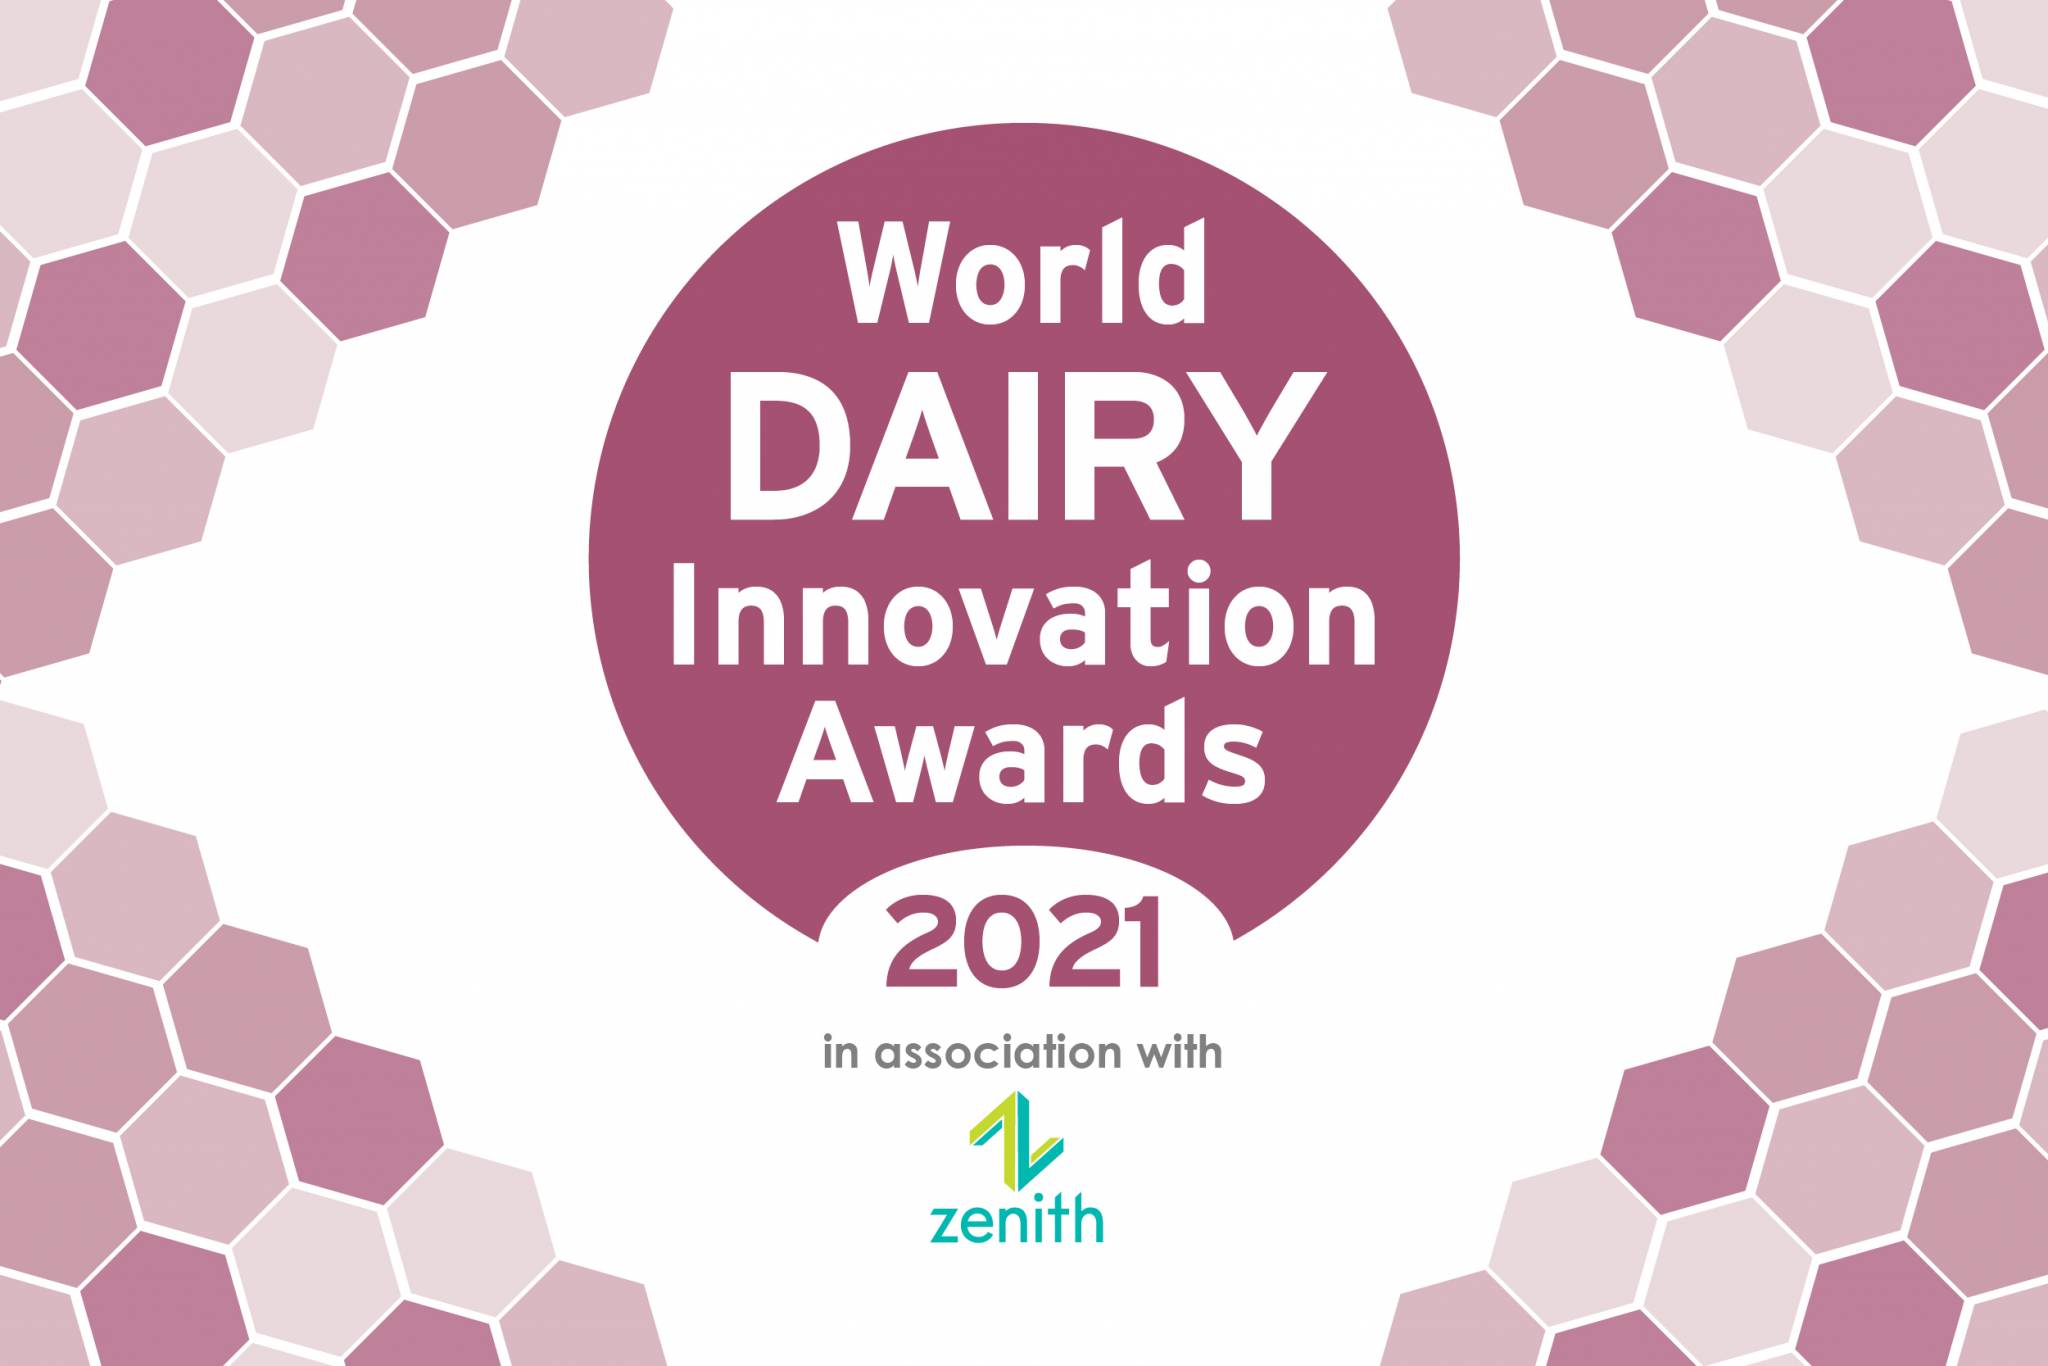 What are the World Dairy Innovation Awards judges expecting to see this year? (Part 2)